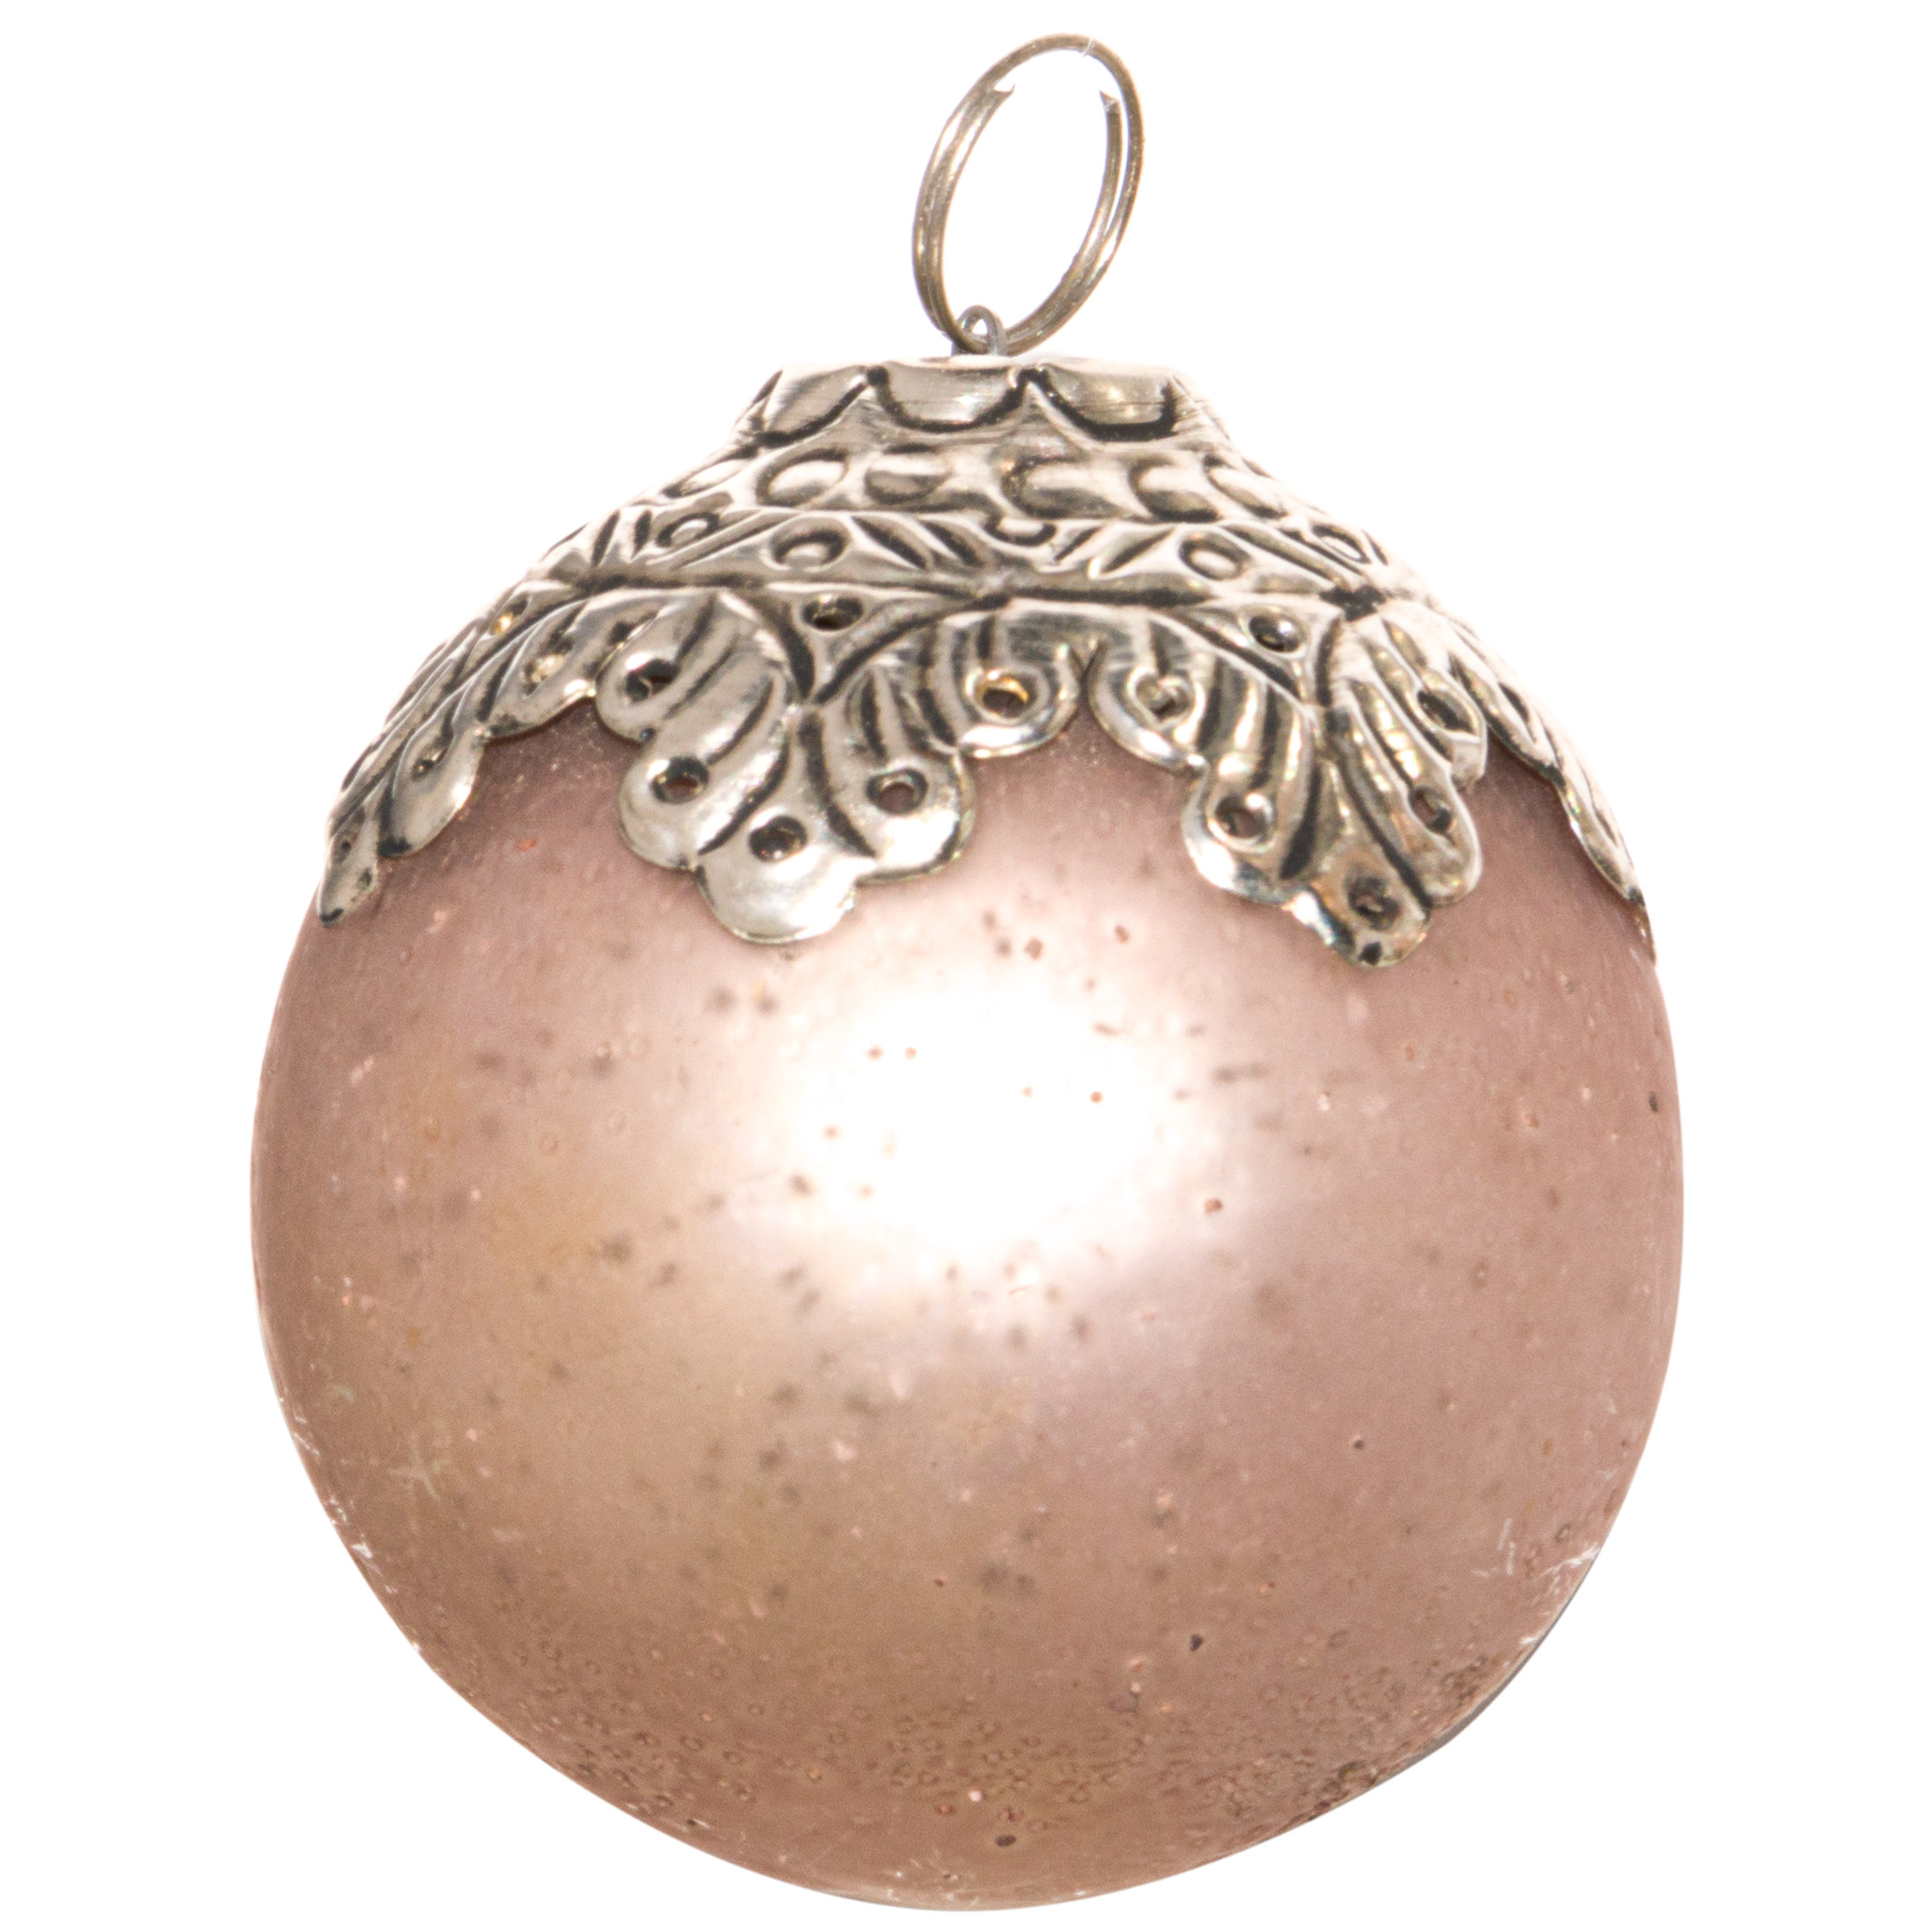 The Noel Collection Venus Crested Small Bauble - Image 1